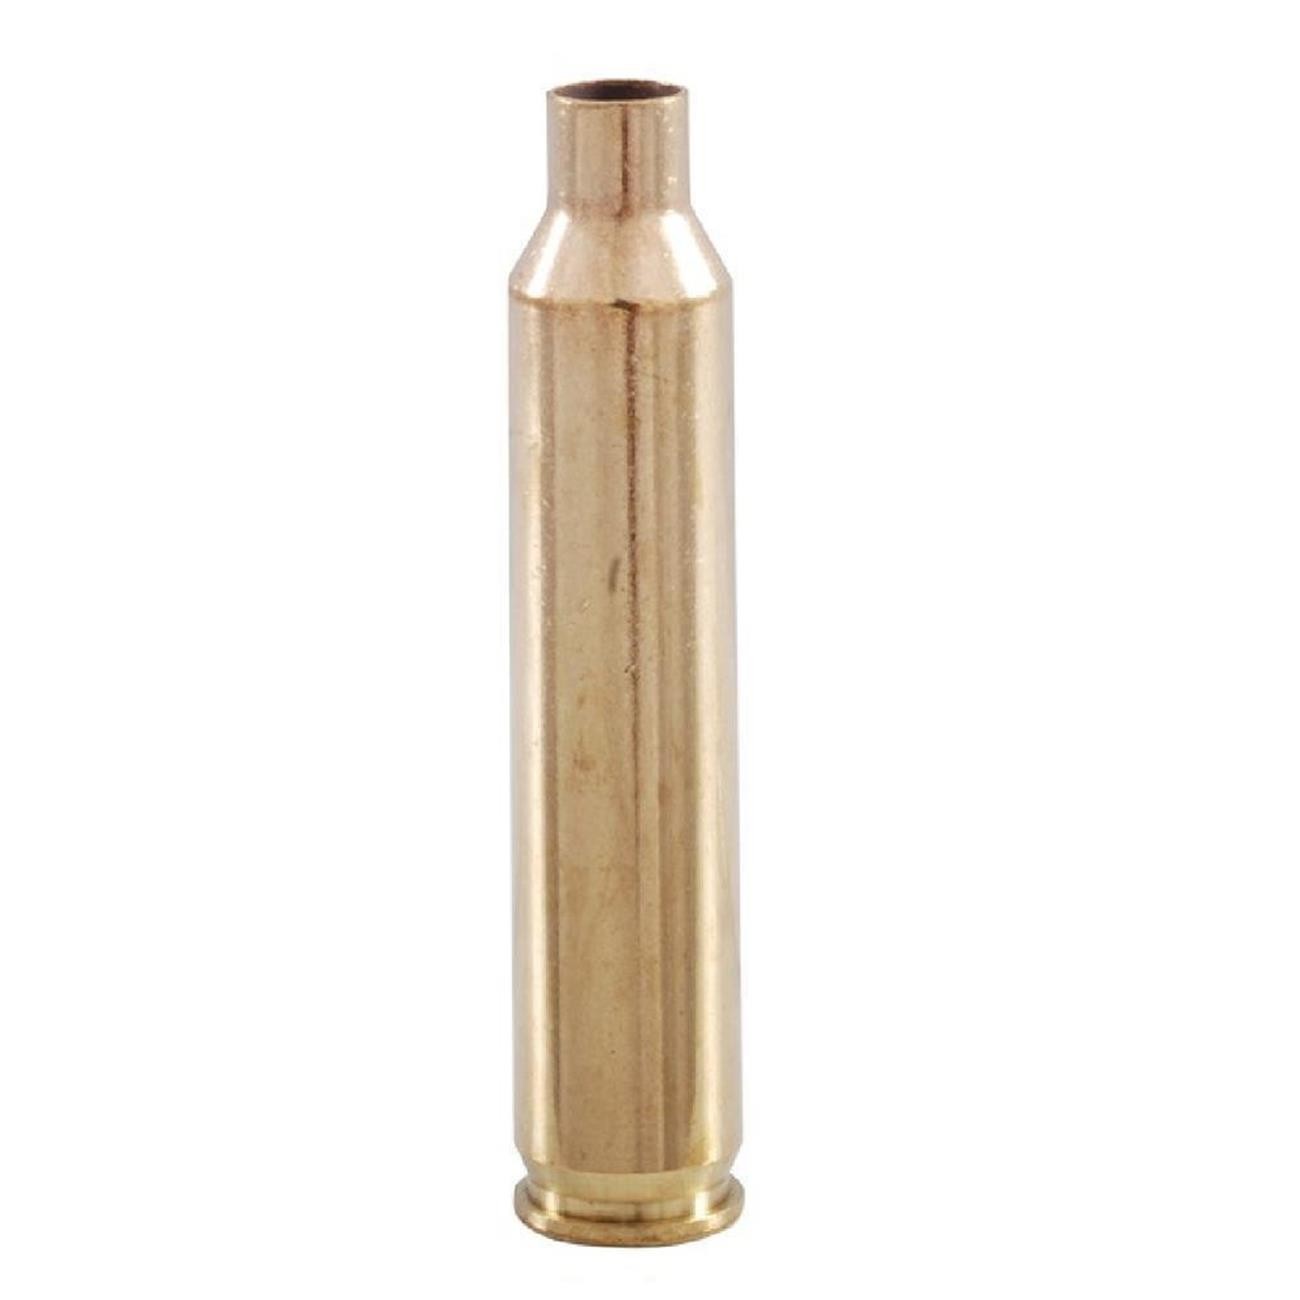 Hornady 7mm Rem Mag Brass In Stock Now For Sale Near Me Online, Buy Cheap!